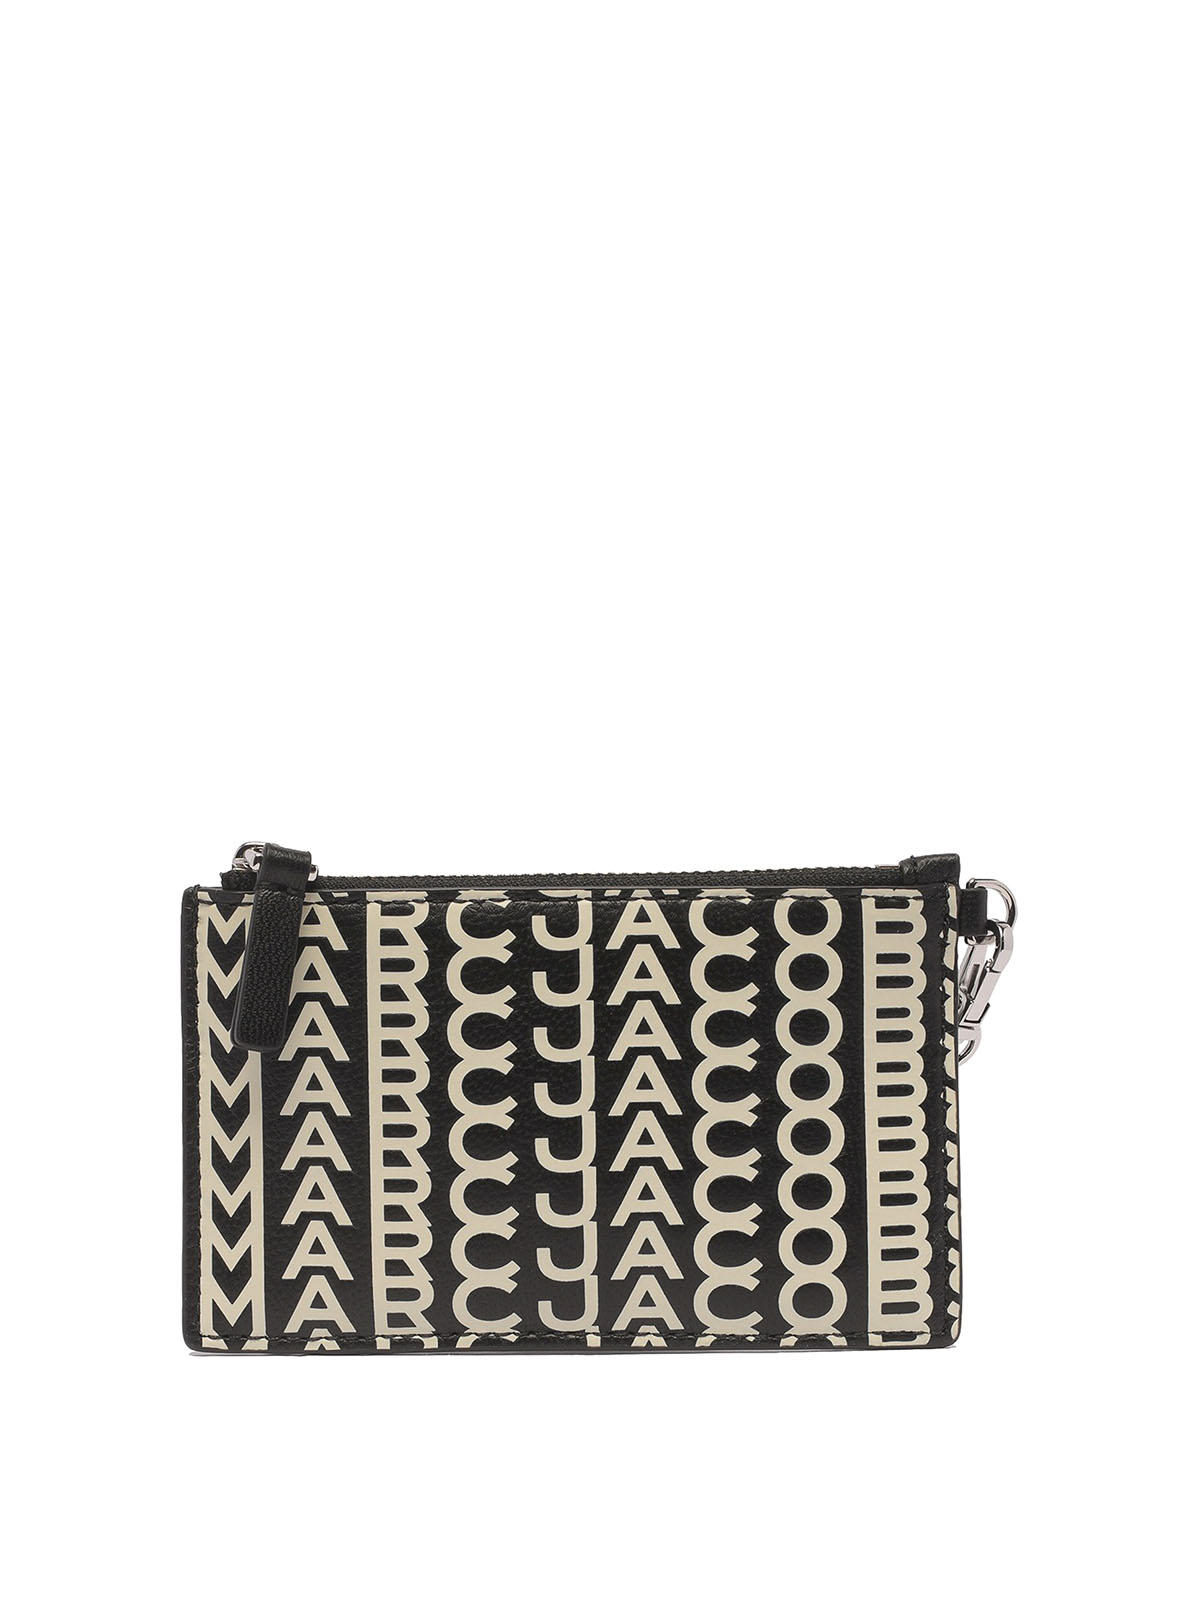 Marc Jacobs Monogrammed Wallet With Wrist Strap In Black